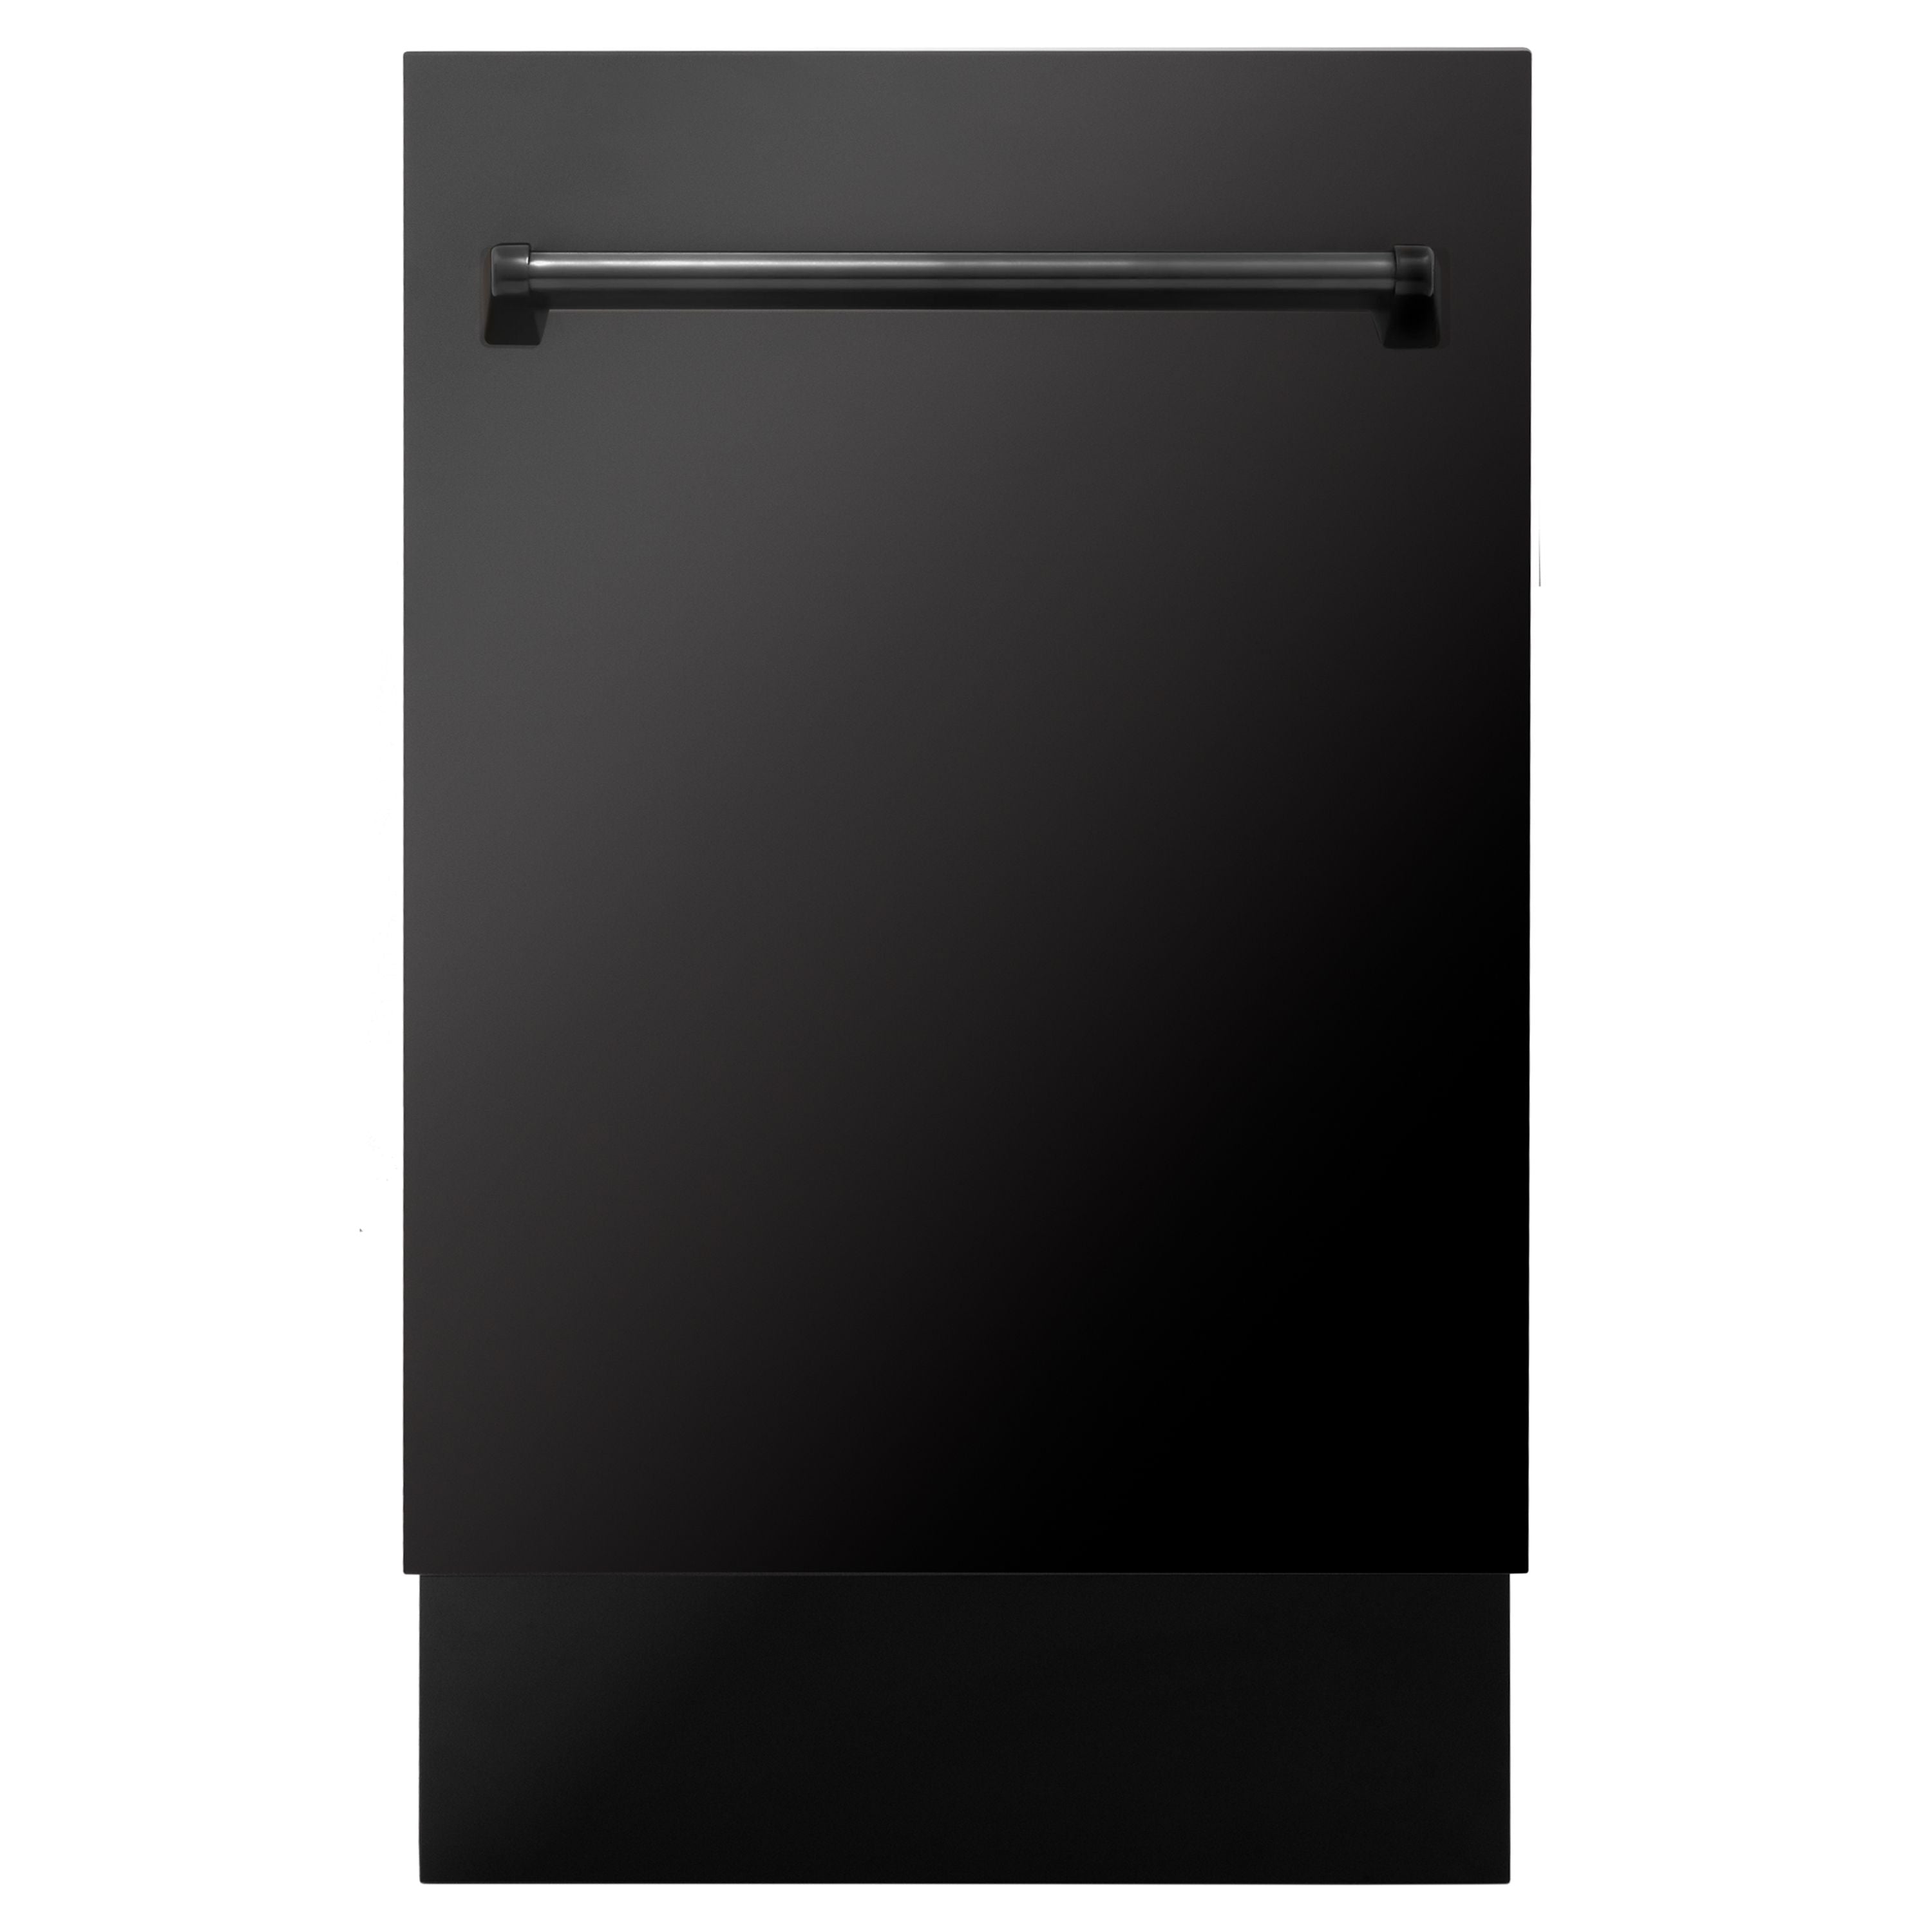 ZLINE 18 In. Tallac Series 3rd Rack Top Control Dishwasher in Black Stainless Steel, 51dBa